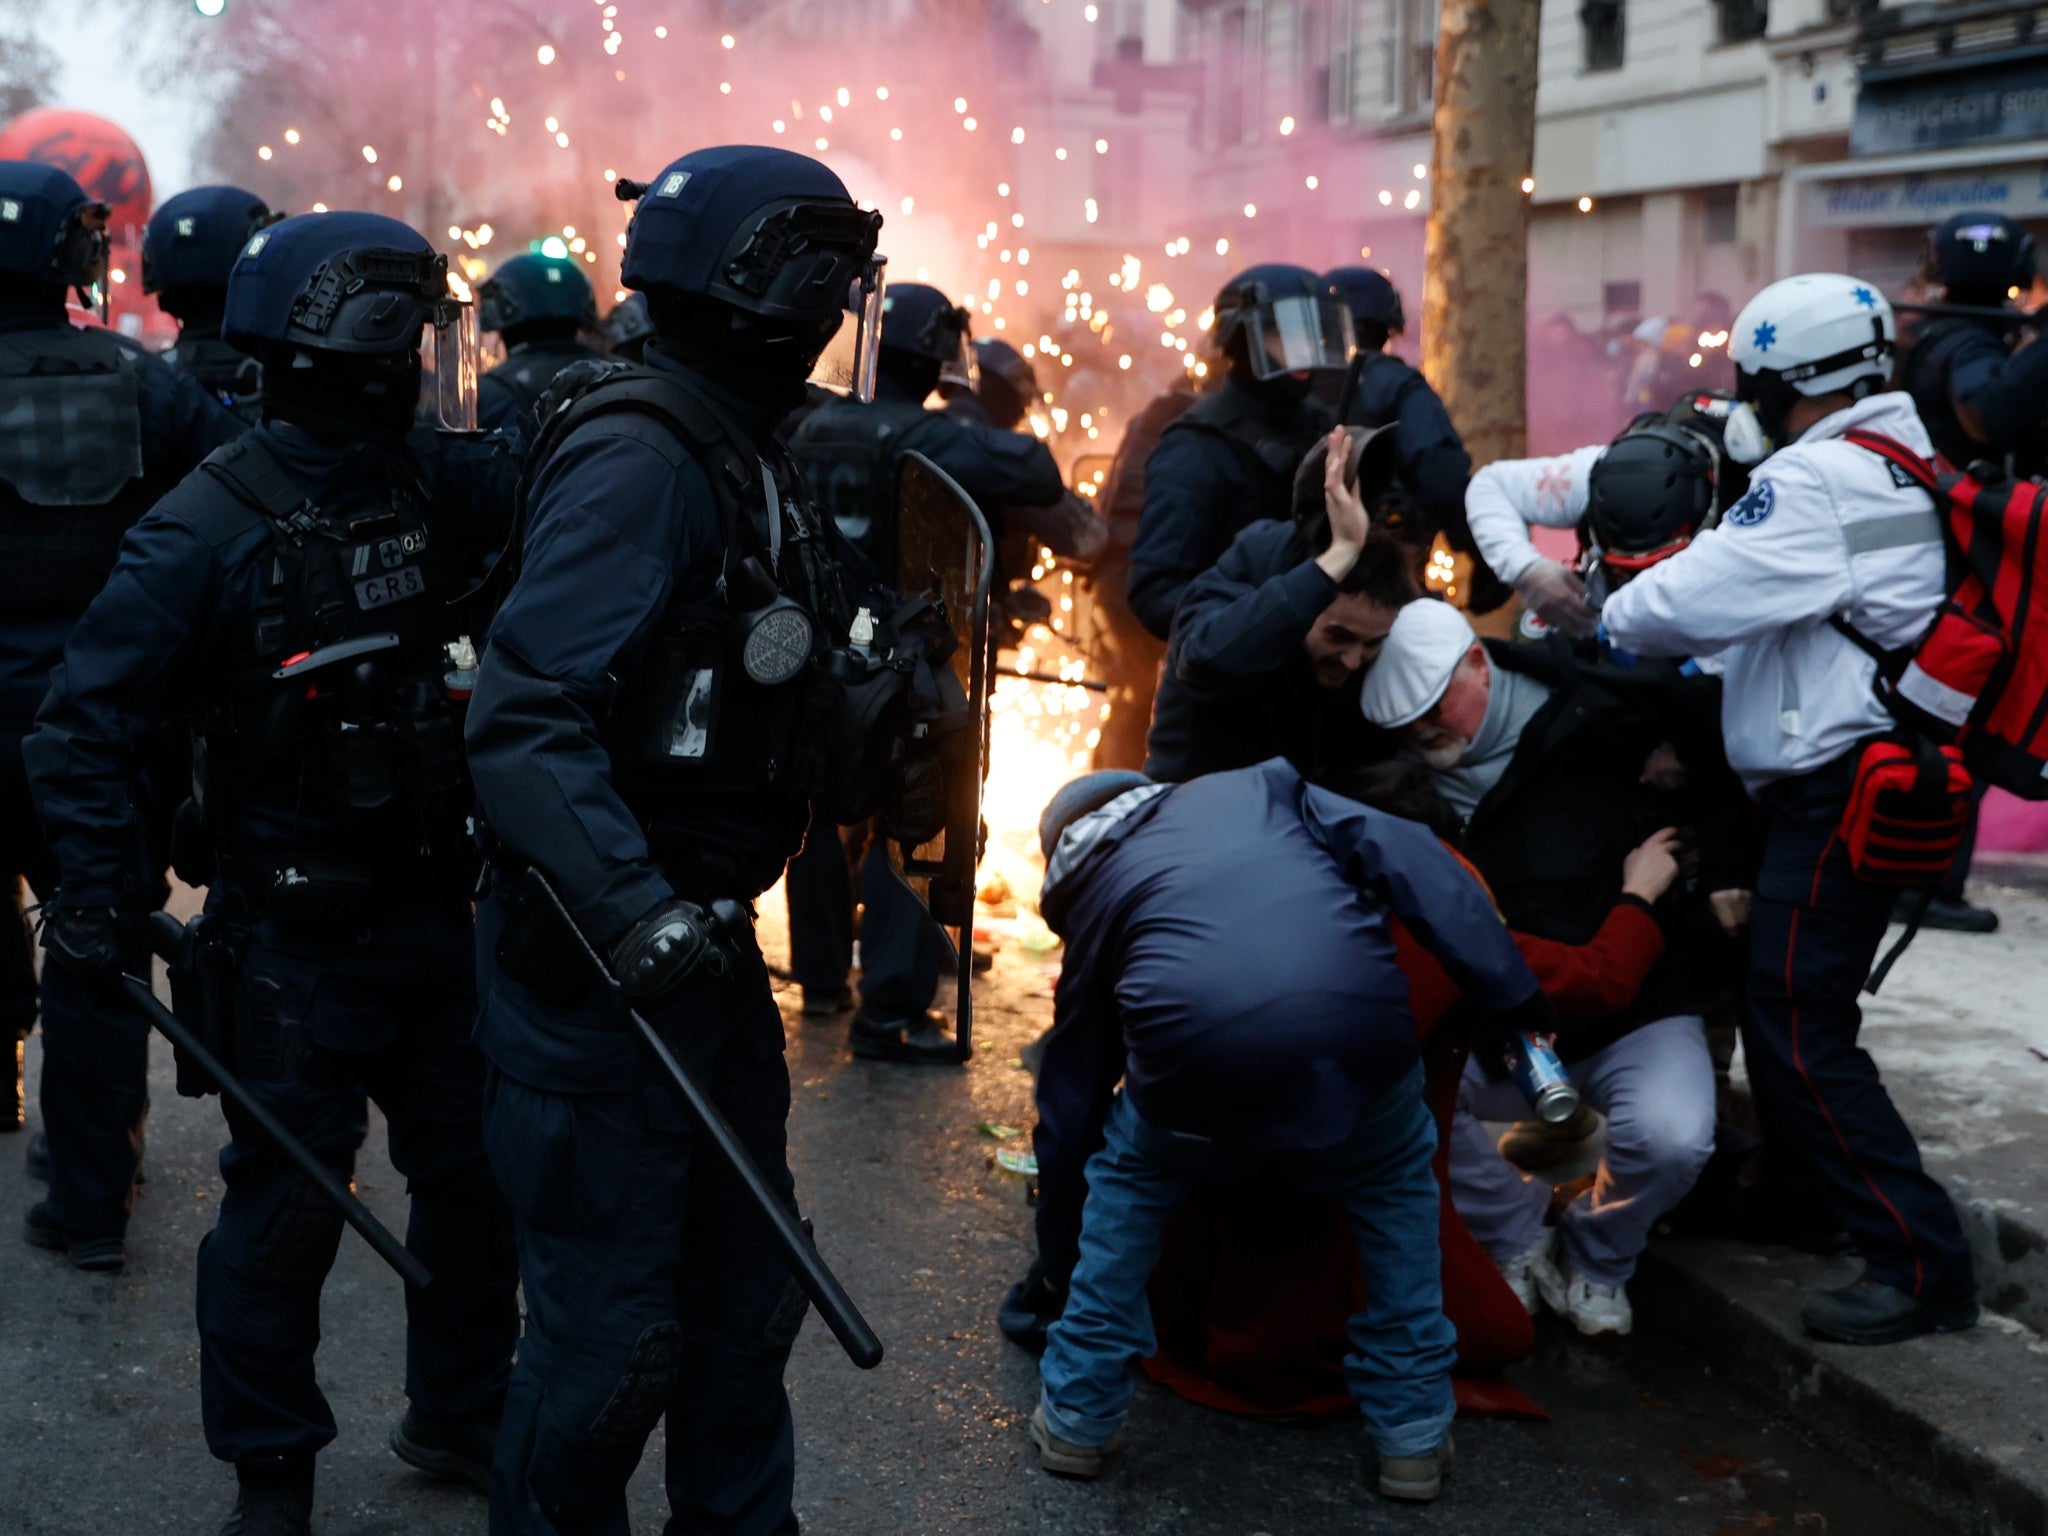 Demonstrators protect themselves near riot police officers in Paris